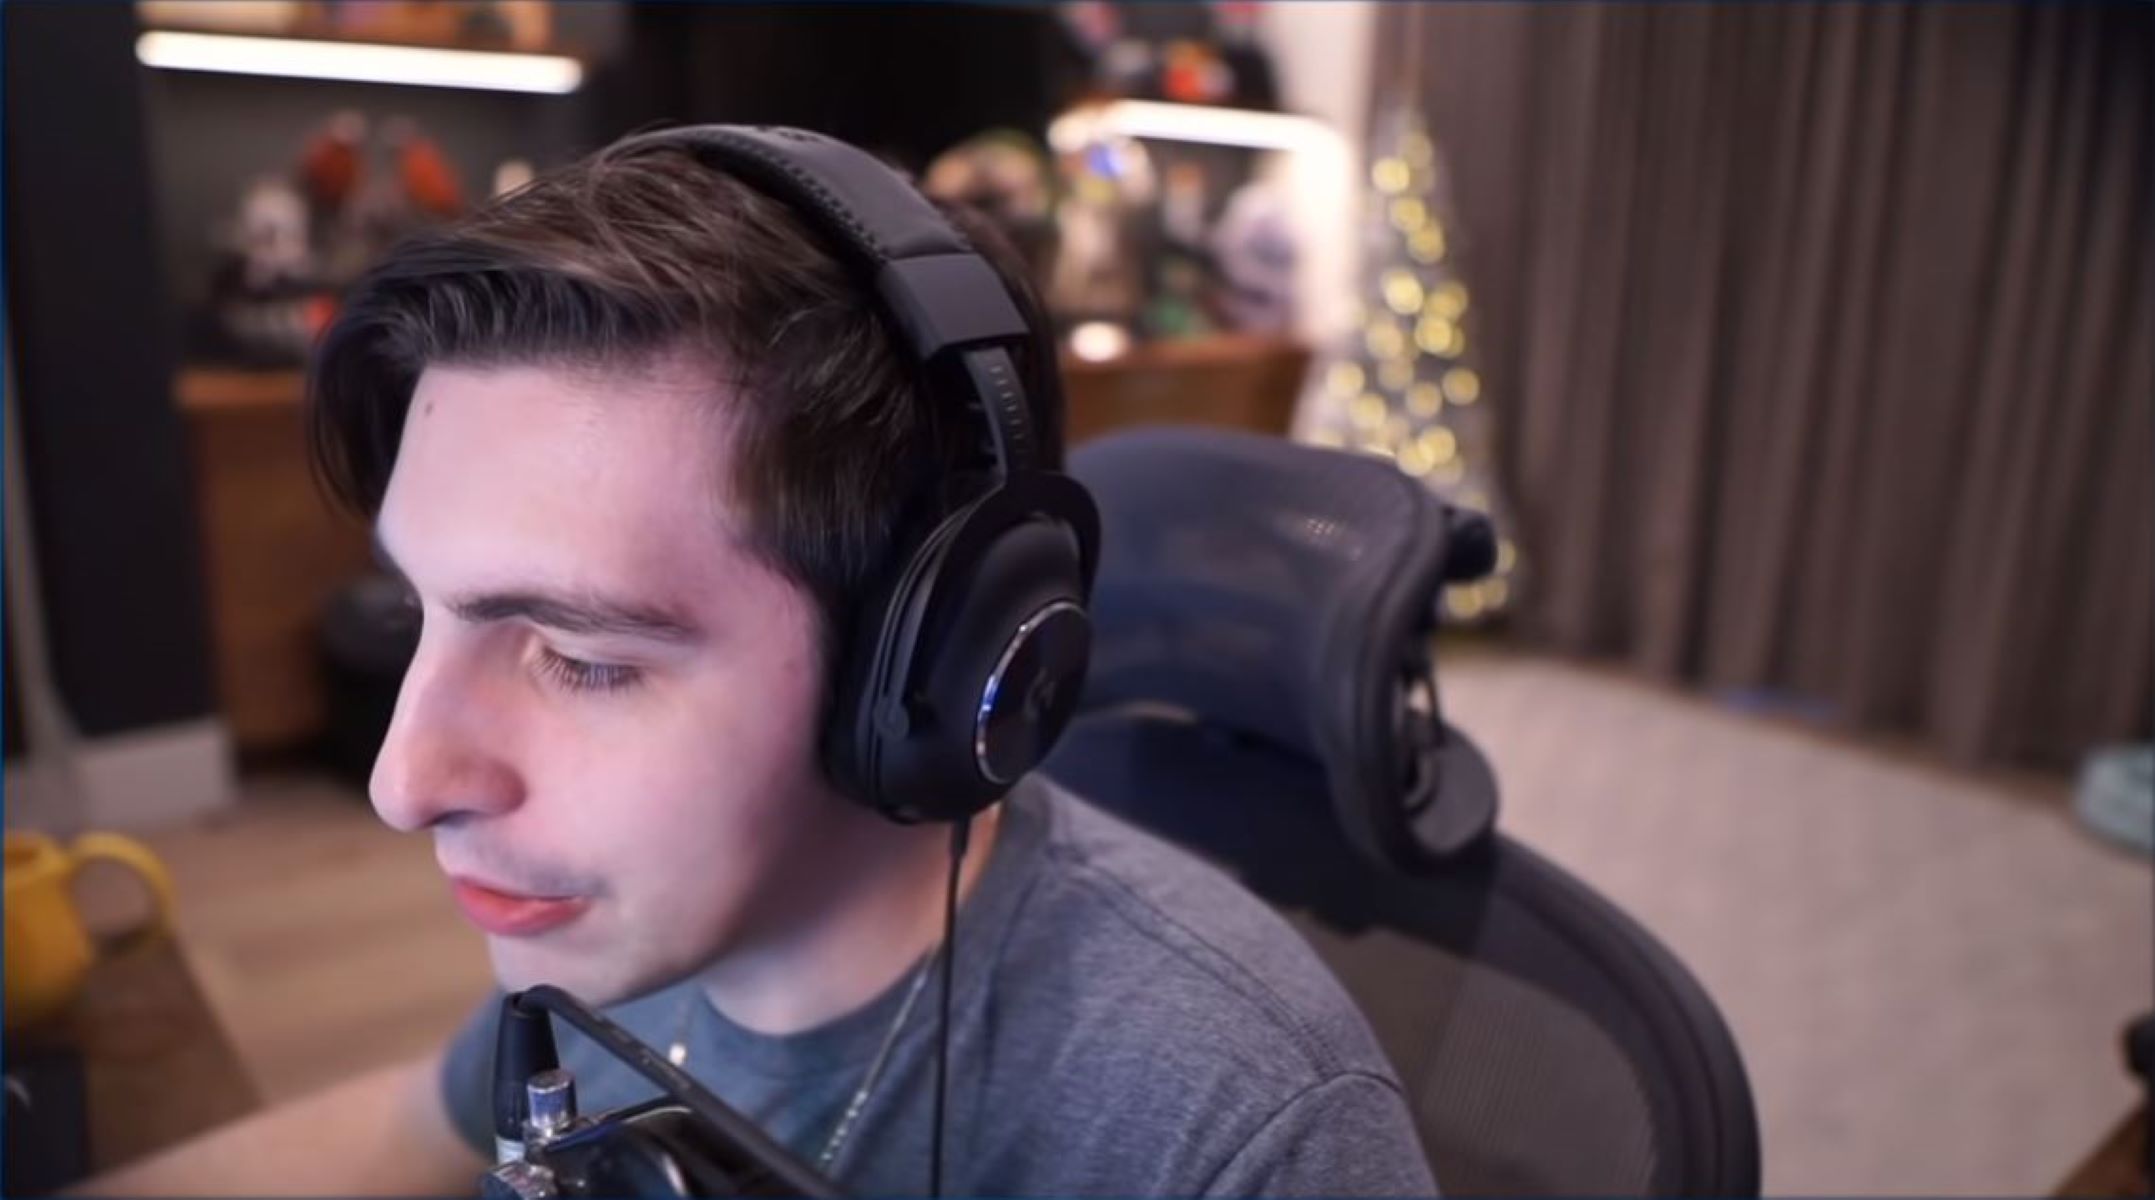 What Kind Of Gaming Chair Does Shroud Use